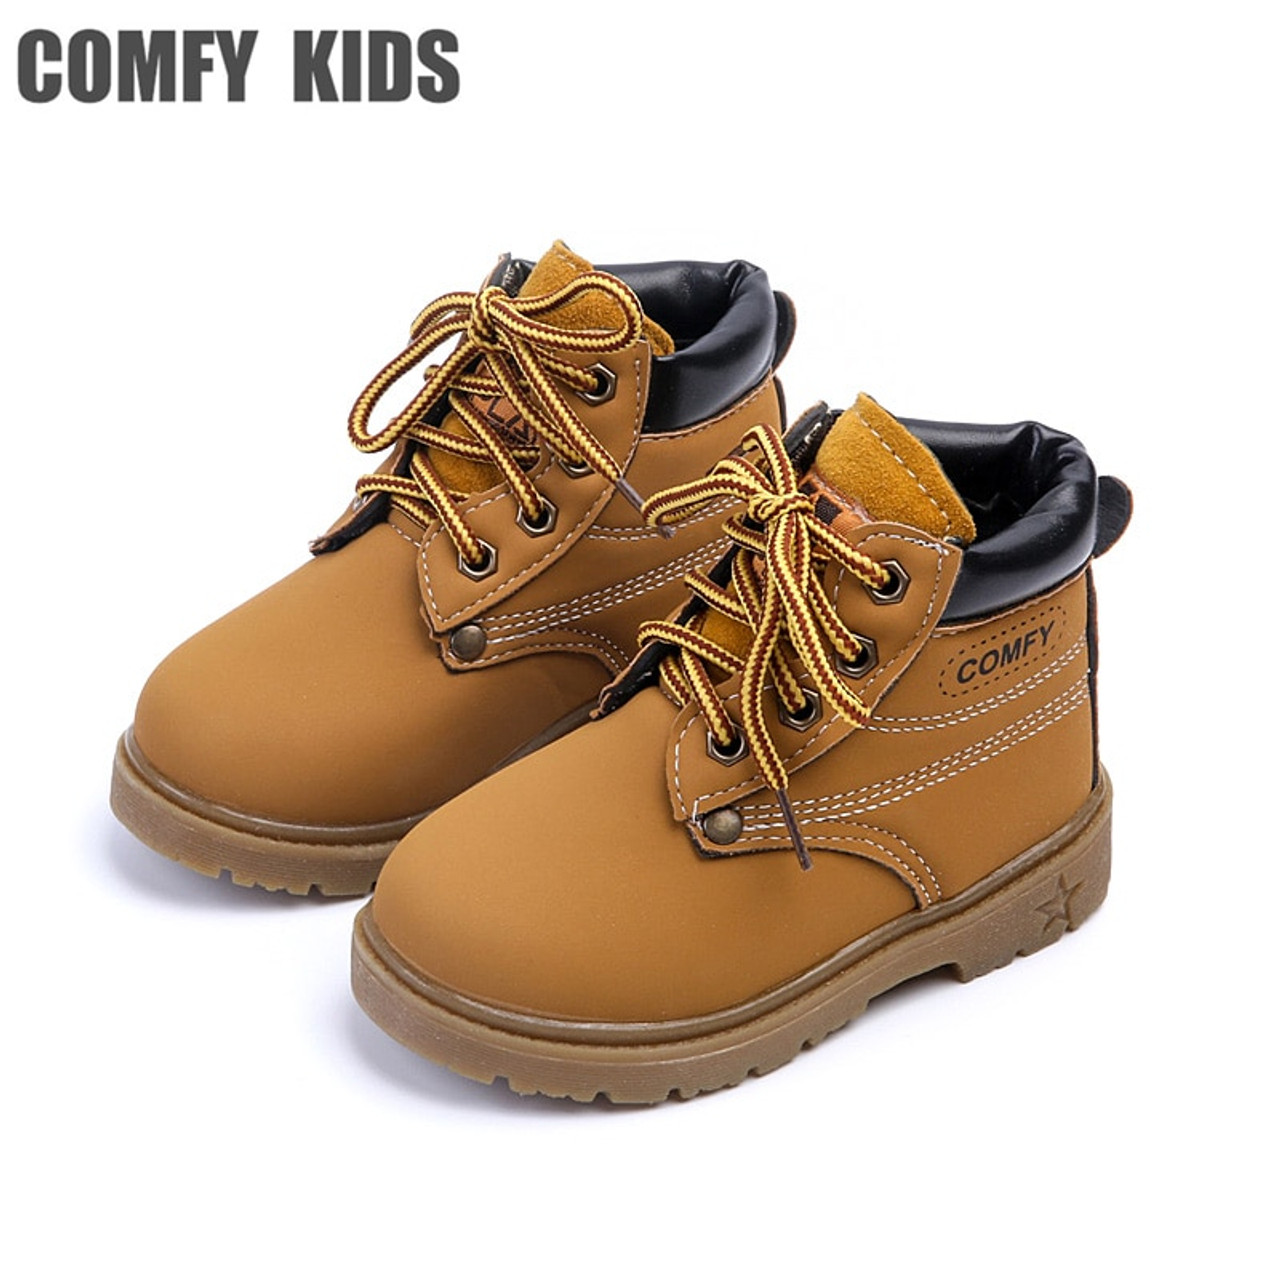 leather boots for kids